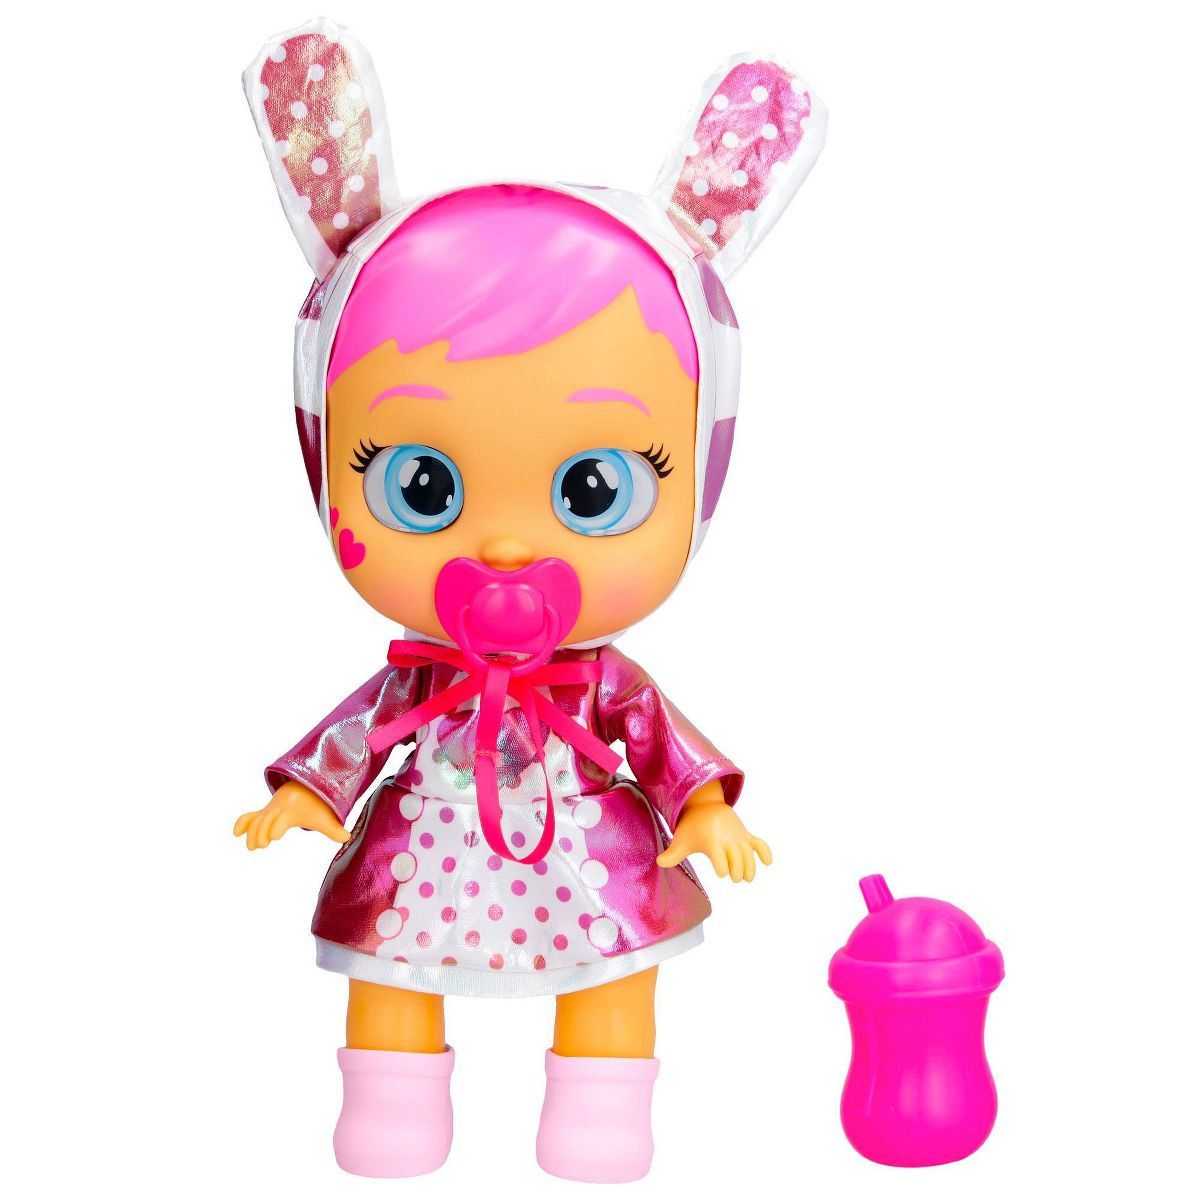 Cry Babies Star Coney 12" Baby Doll w/ Light Up Eyes and Star Themed Outfit | Target